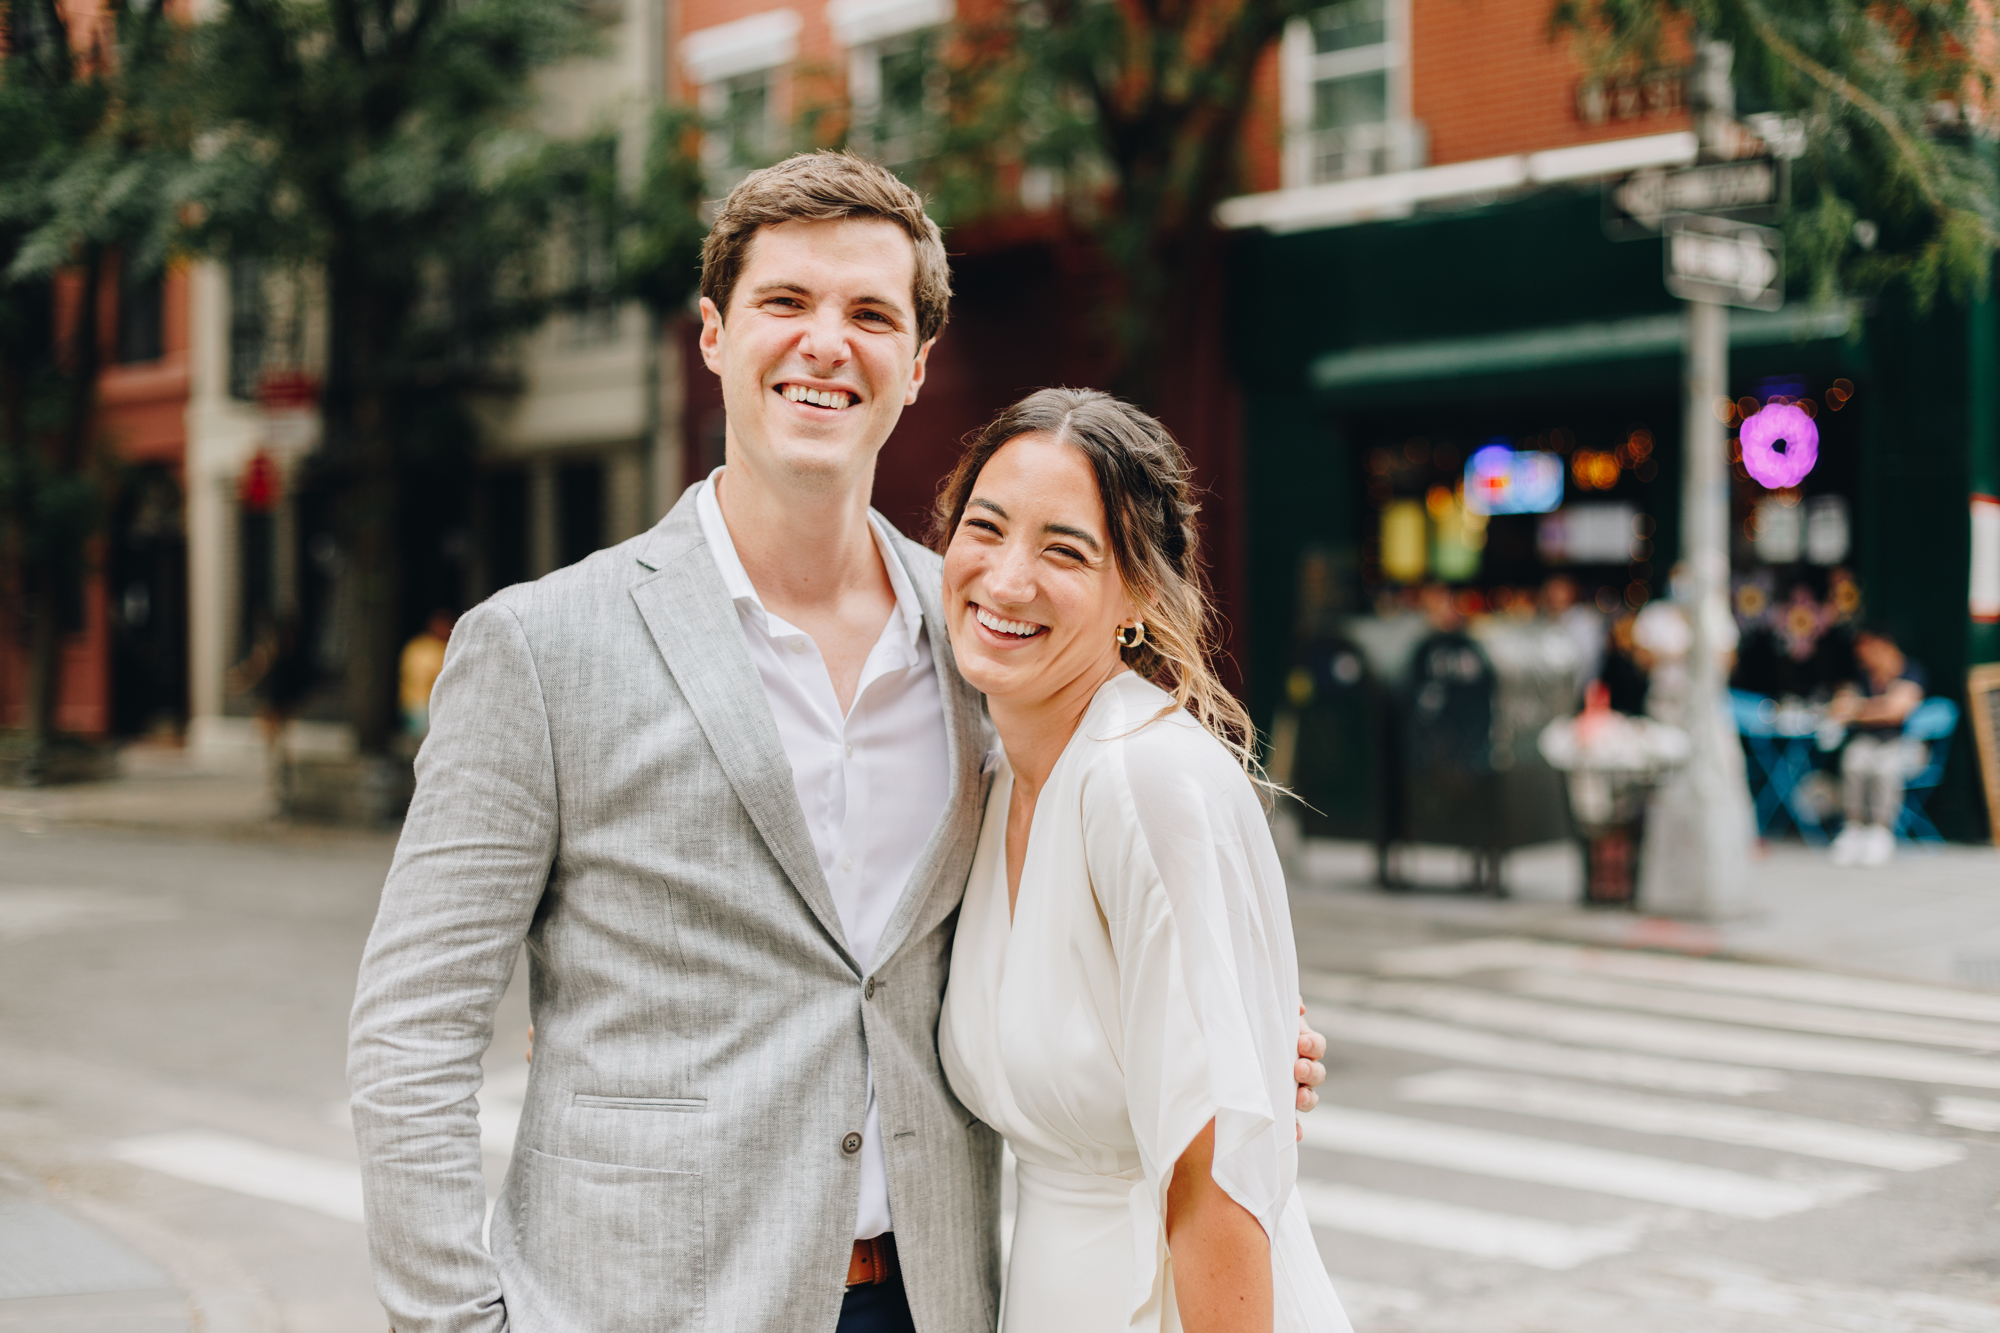 Candid elopement photos in NYC